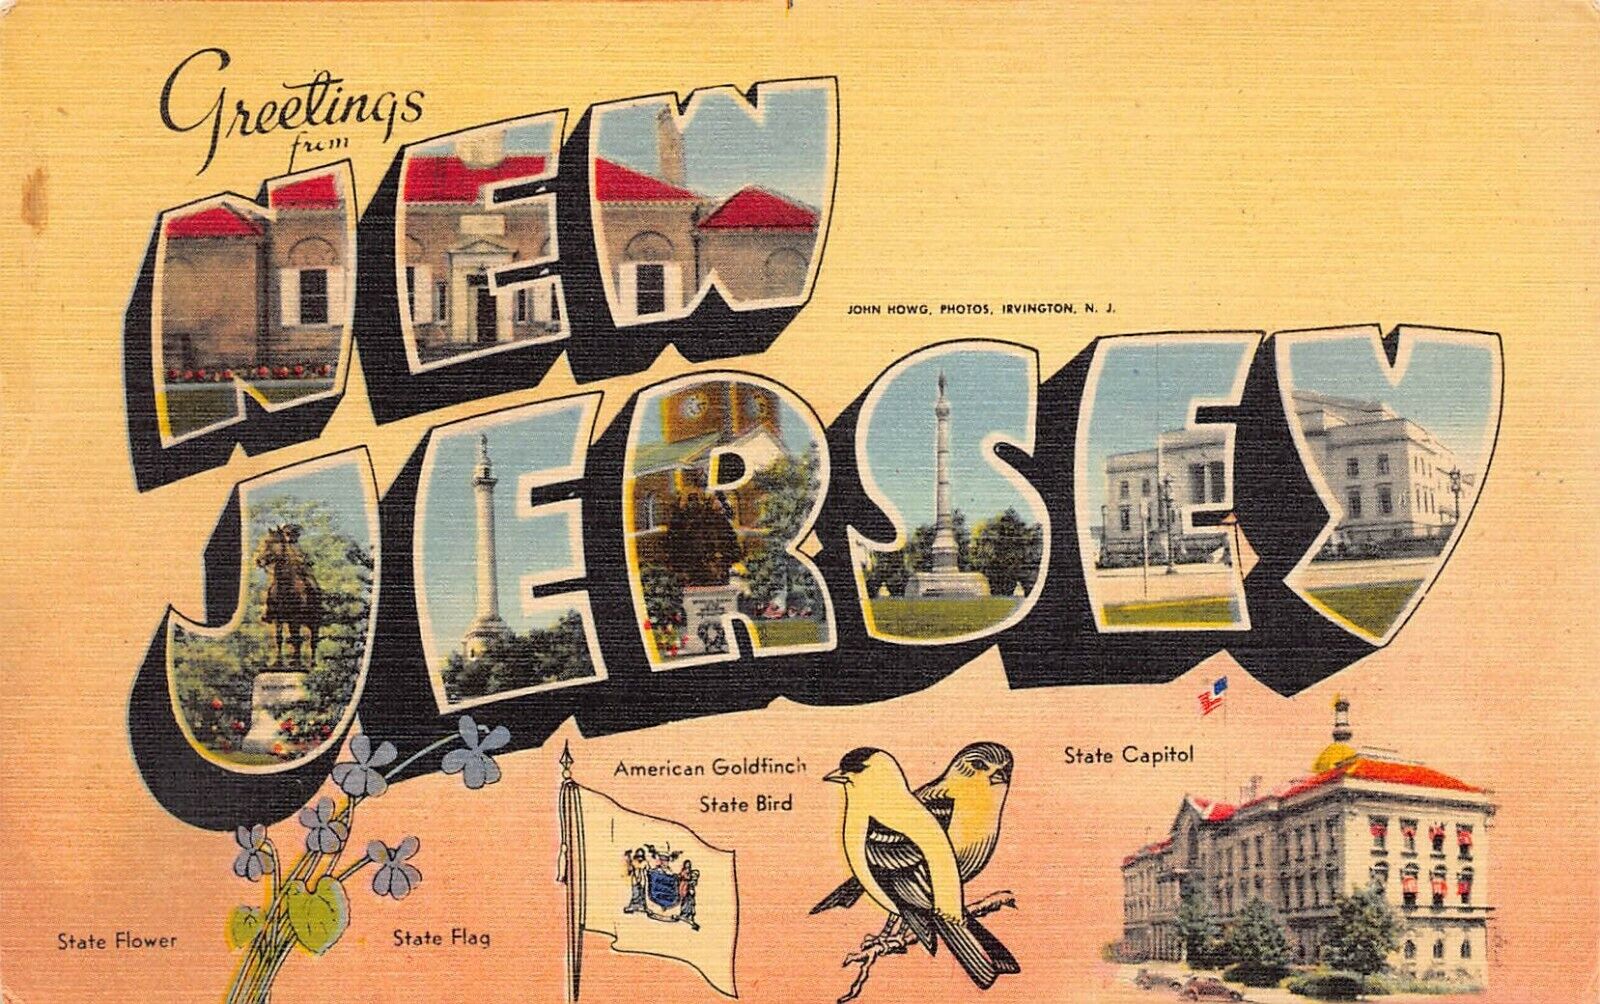 New Jersey NJ Greetings From Large Letter Garden State Linen 5301 Postcard